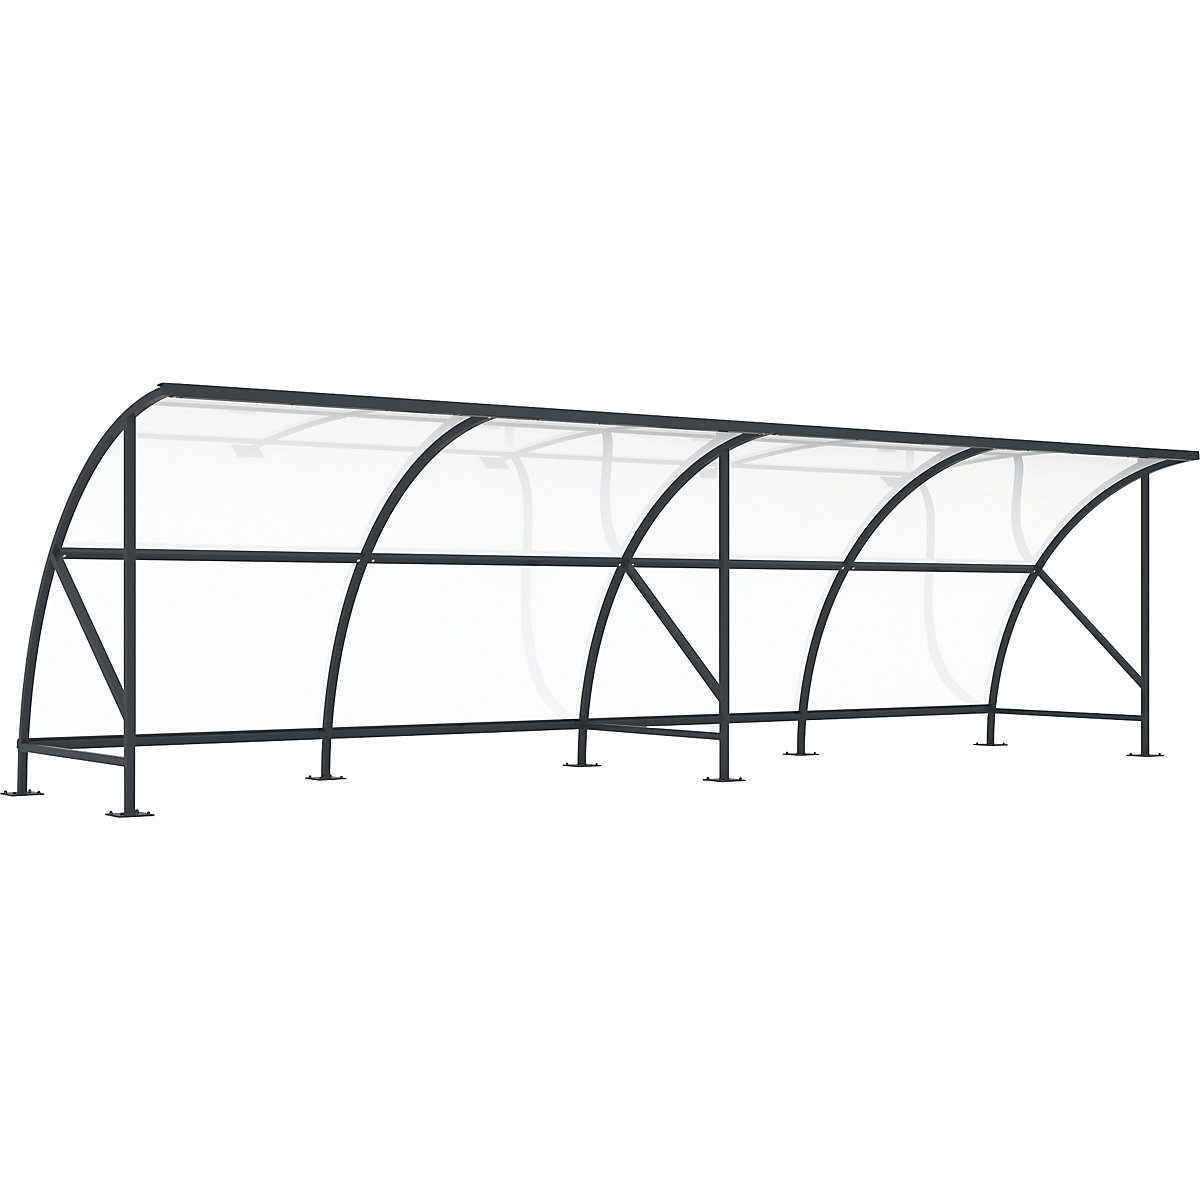 Bicycle shelter, made of polycarbonate, WxD 8250 x 2100 mm, charcoal RAL 7016-9